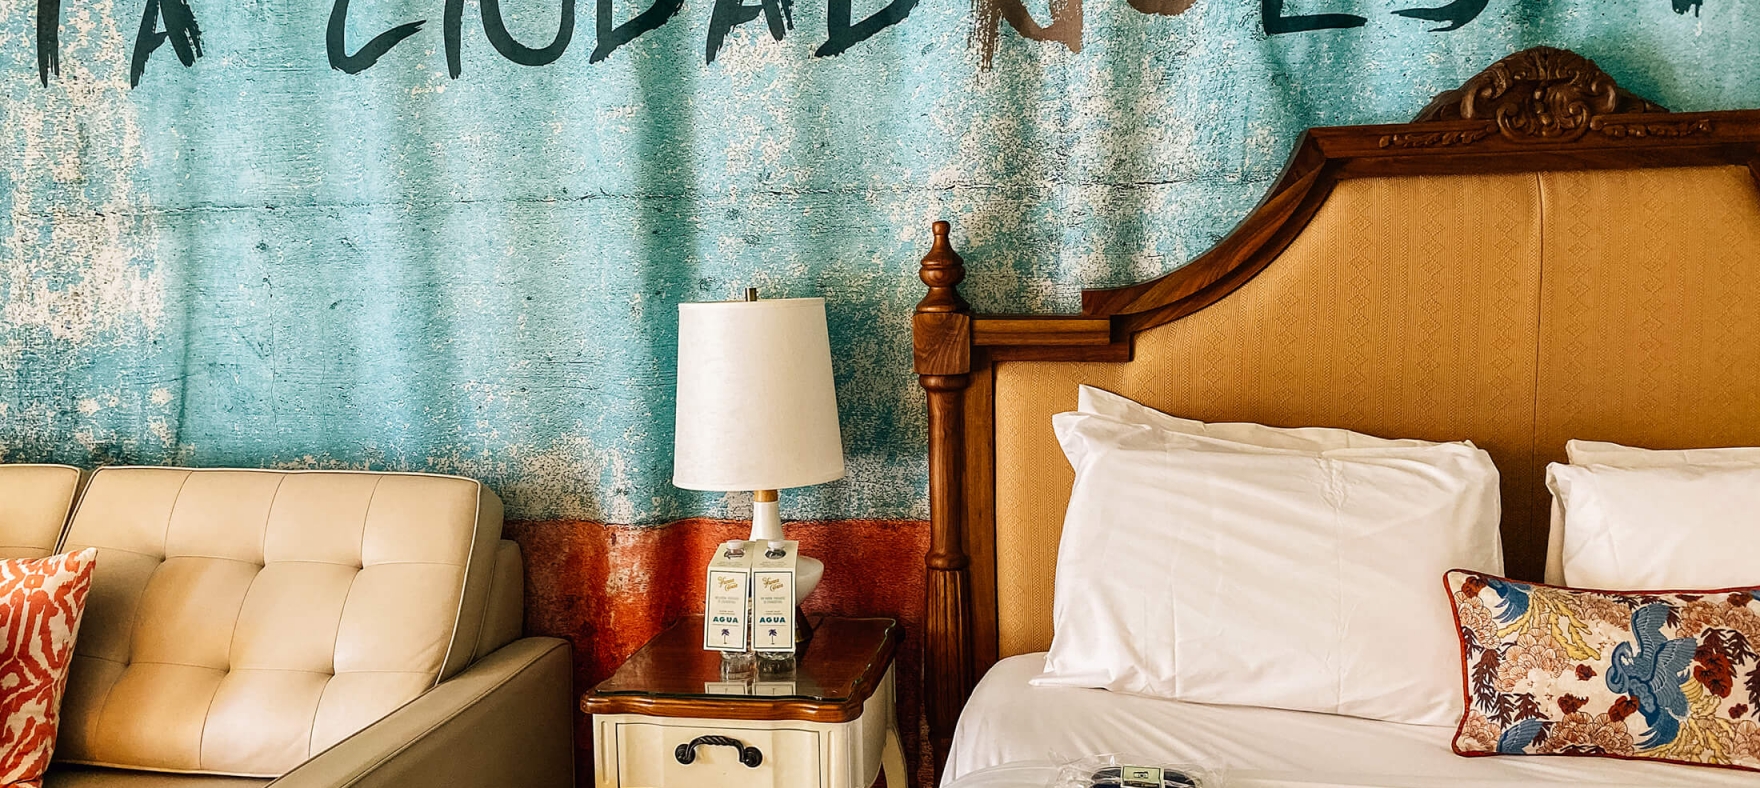 A close focus on the lamp placed on a shared bedside table in between the queen bed and couch